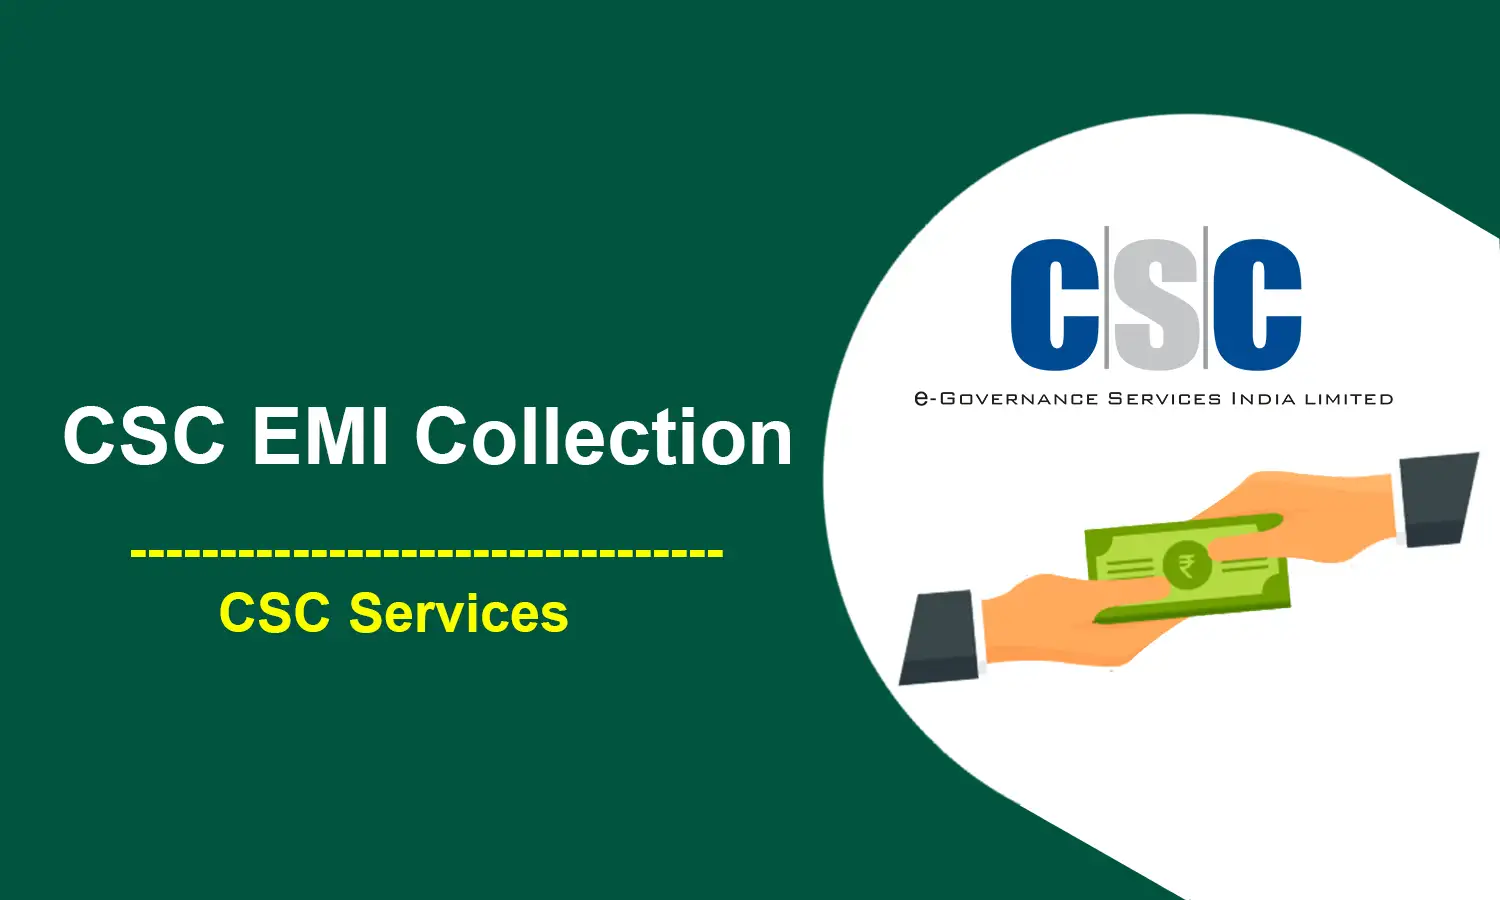 CSC EMI Collection